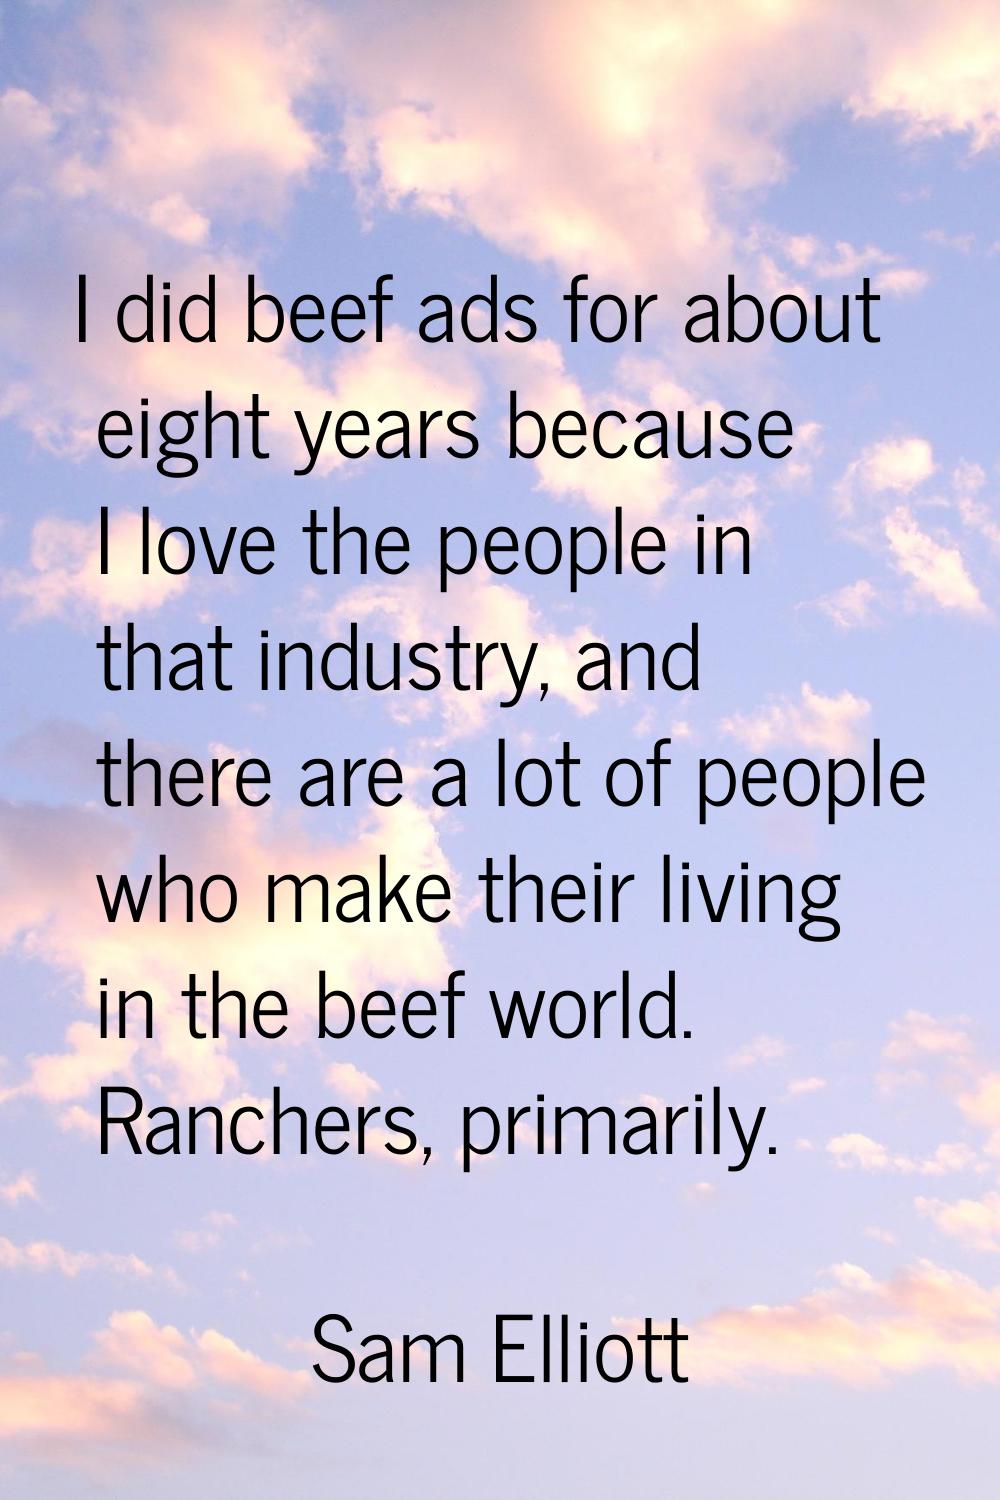 I did beef ads for about eight years because I love the people in that industry, and there are a lo